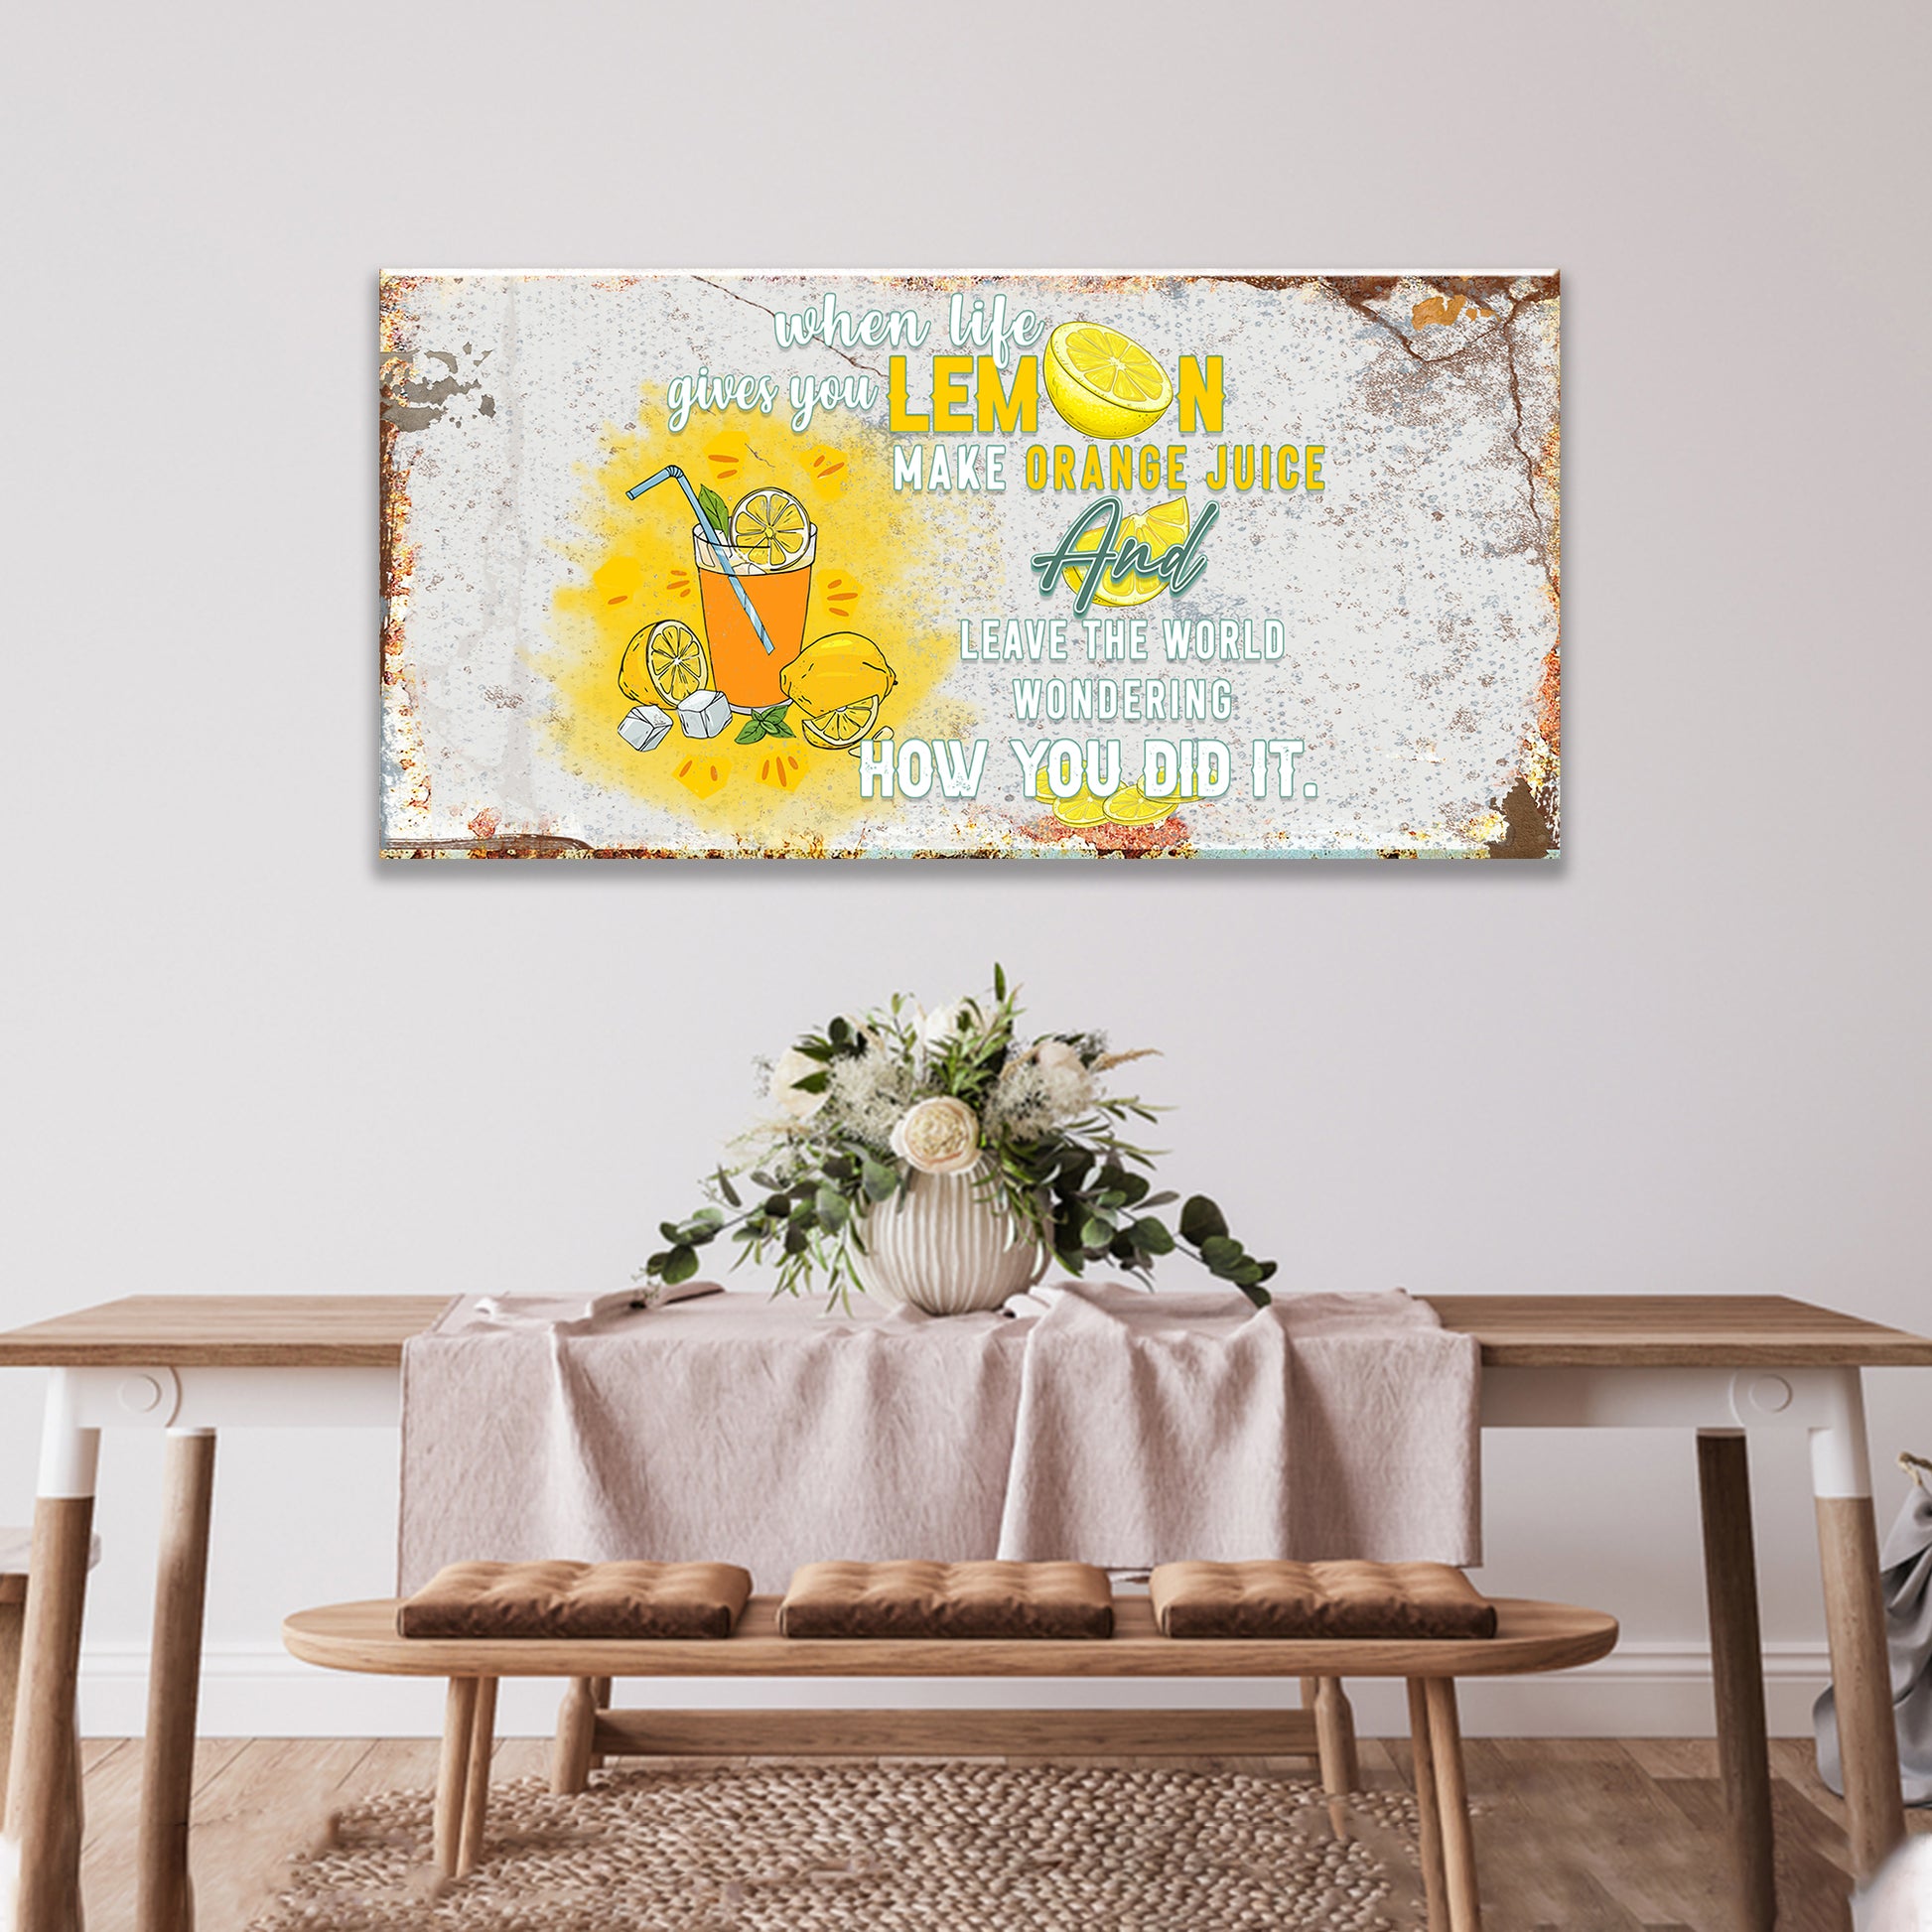 Life And Lemons Sign - Image by Tailored Canvases